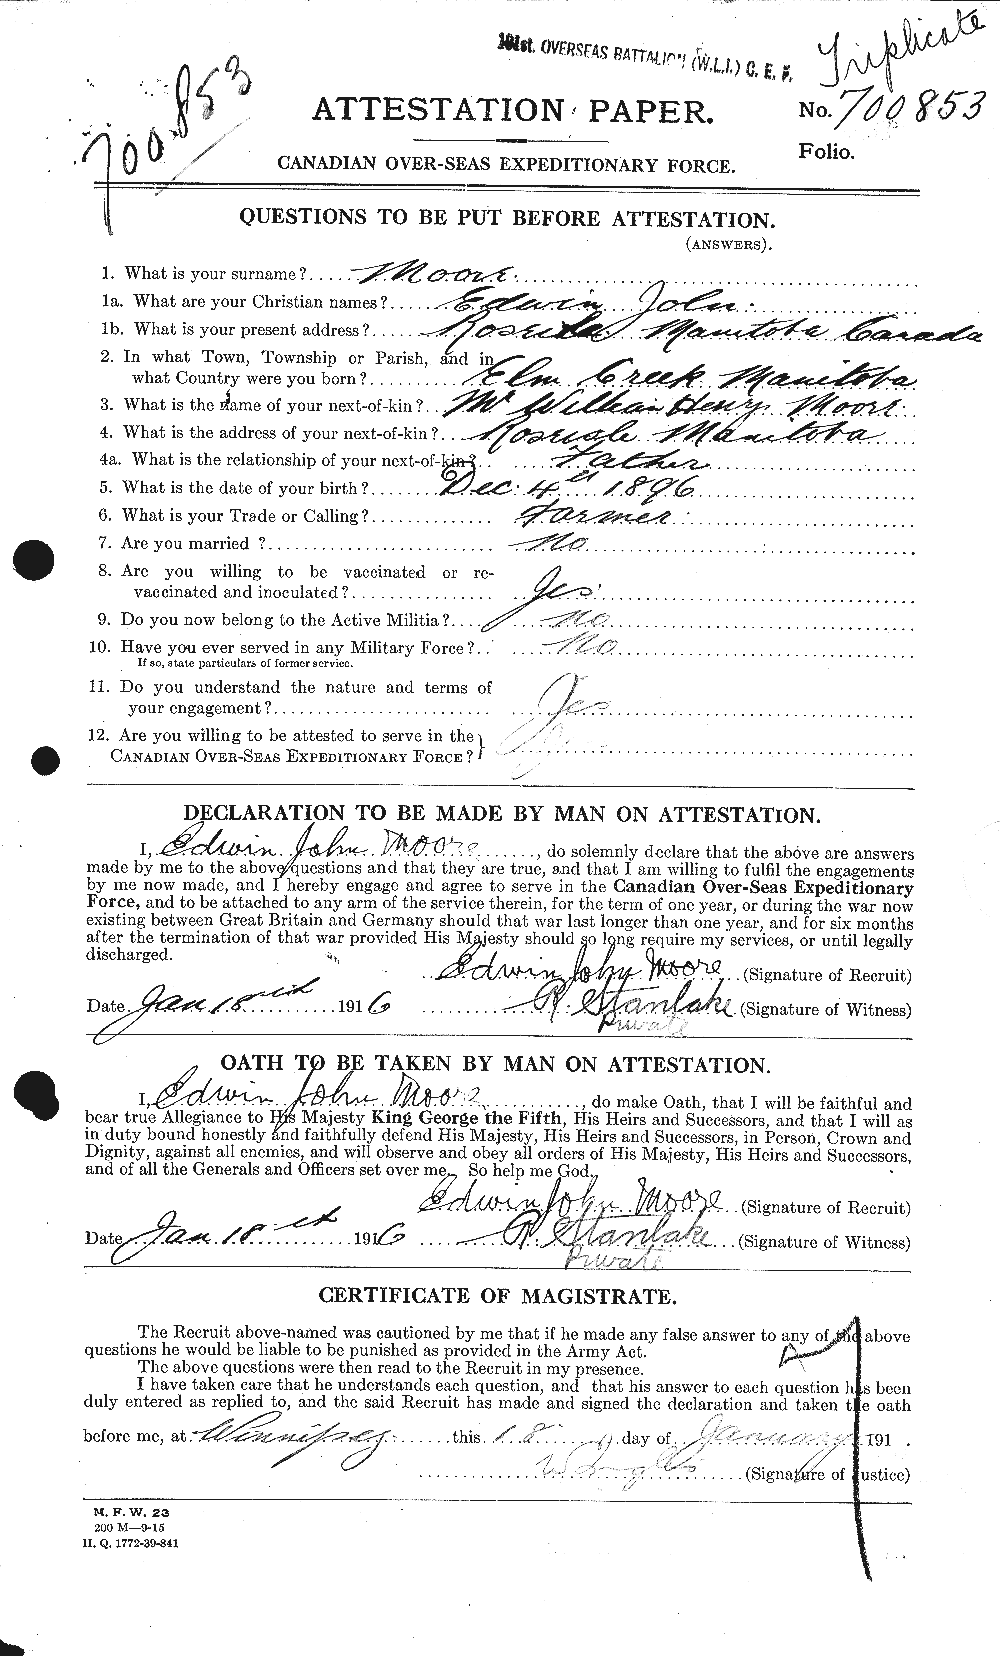 Personnel Records of the First World War - CEF 506646a